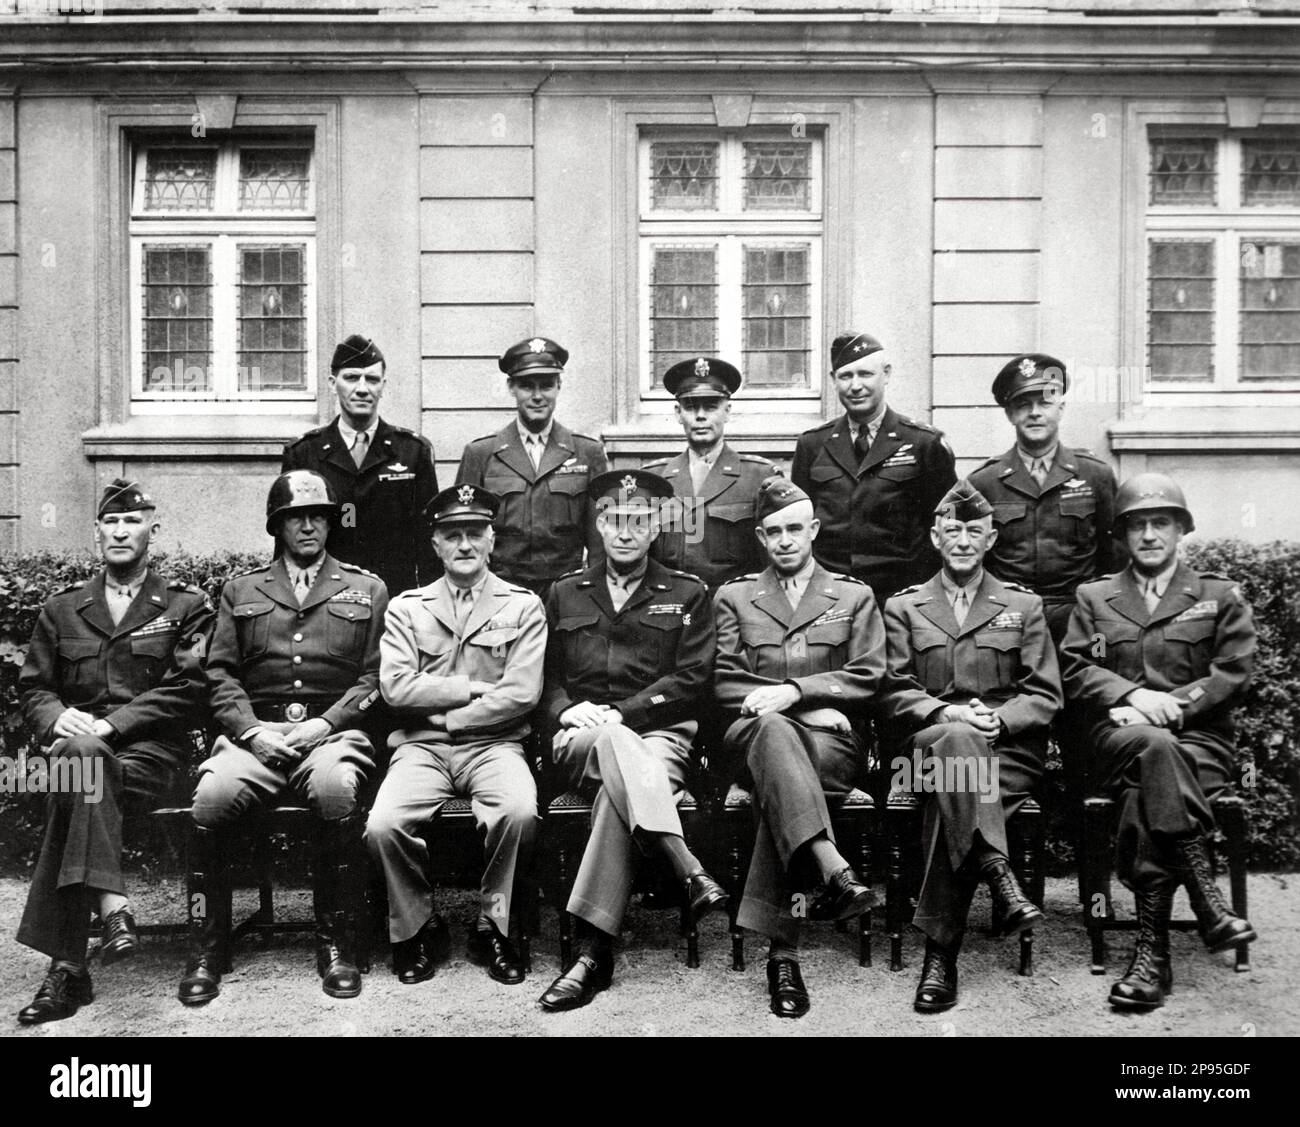 1945 , USA : The future President of the United States and Dwight D. Eisenhower ( 1890 - 1969 ) in center of this photo. Senior American military officials of World War II. Seated are (from left to right) Gens. William H. Simpson, George S. Patton , Carl A. Spaatz, Dwight D. Eisenhower , Omar Bradley , Courtney H. Hodges , and Leonard T. Gerow ; standing are (from left to right) Gens. Ralph F. Stearley , Hoyt Vandenberg , Walter Bedell Smith, Otto P. Weyland  and Richard E. Nugent . - Presidente della Repubblica - USA - ritratto - portrait - military uniform - divisa uniforme militare -WW2 - S Stock Photo